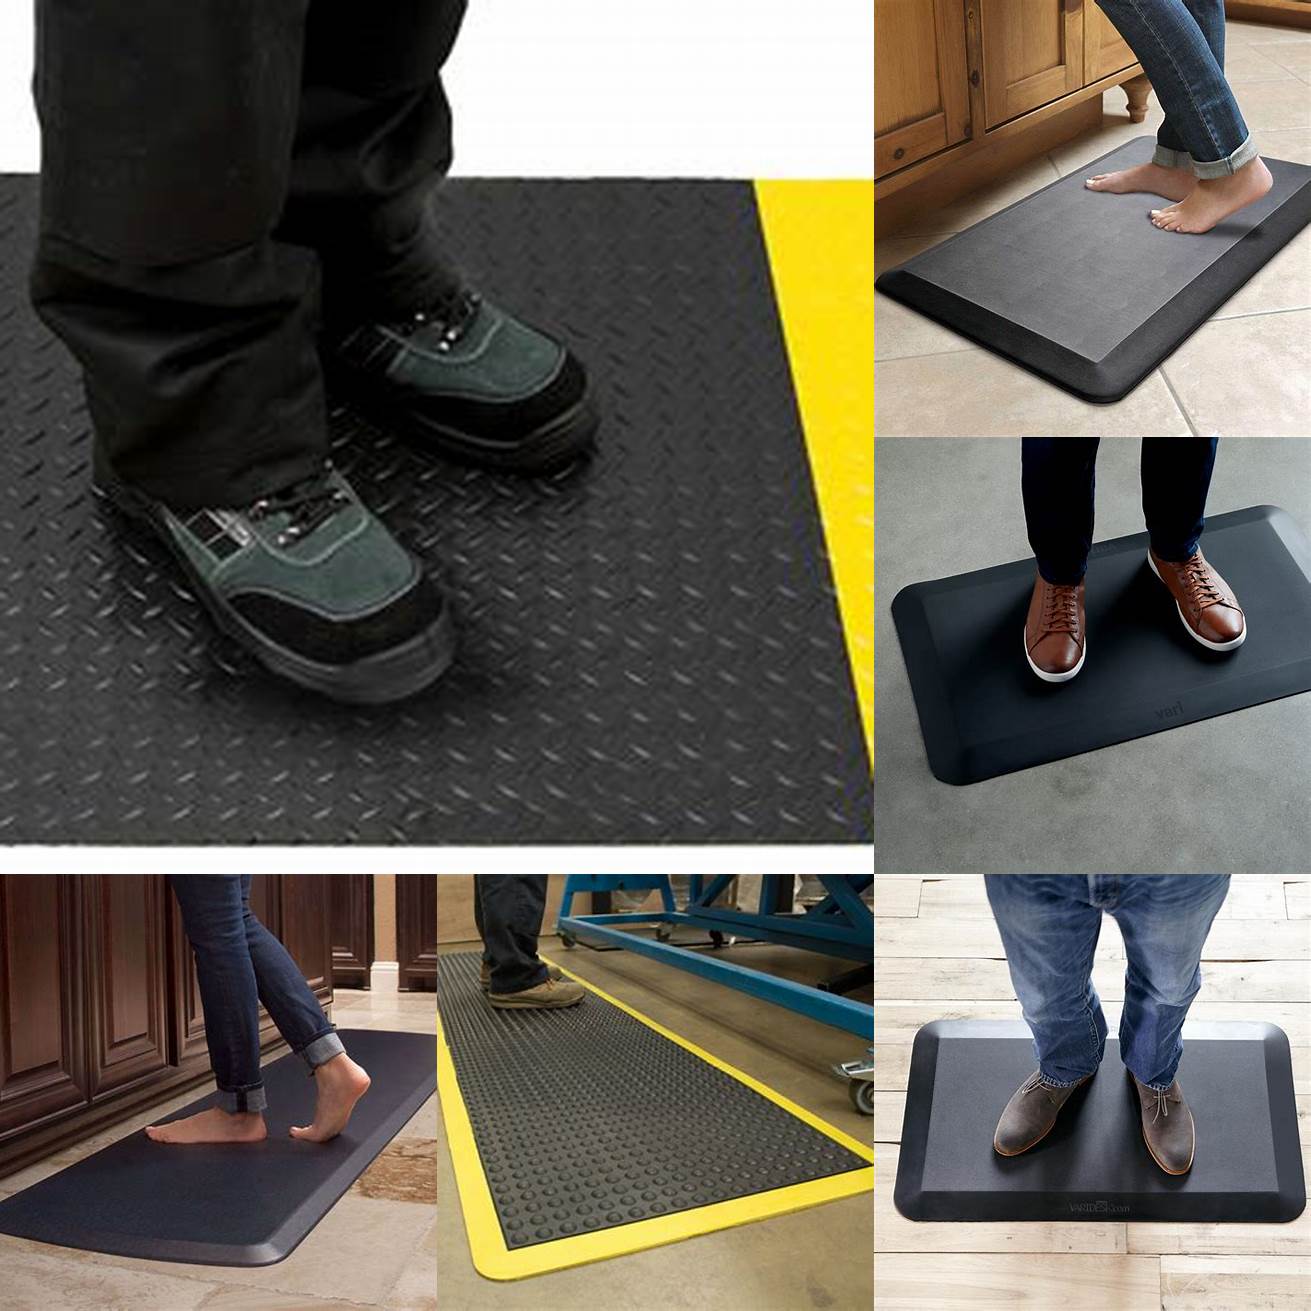 1 Anti-Fatigue Mats These mats are designed to provide cushioning and reduce fatigue when standing for long periods of time They are ideal for cooks chefs and anyone who spends a lot of time in the kitchen